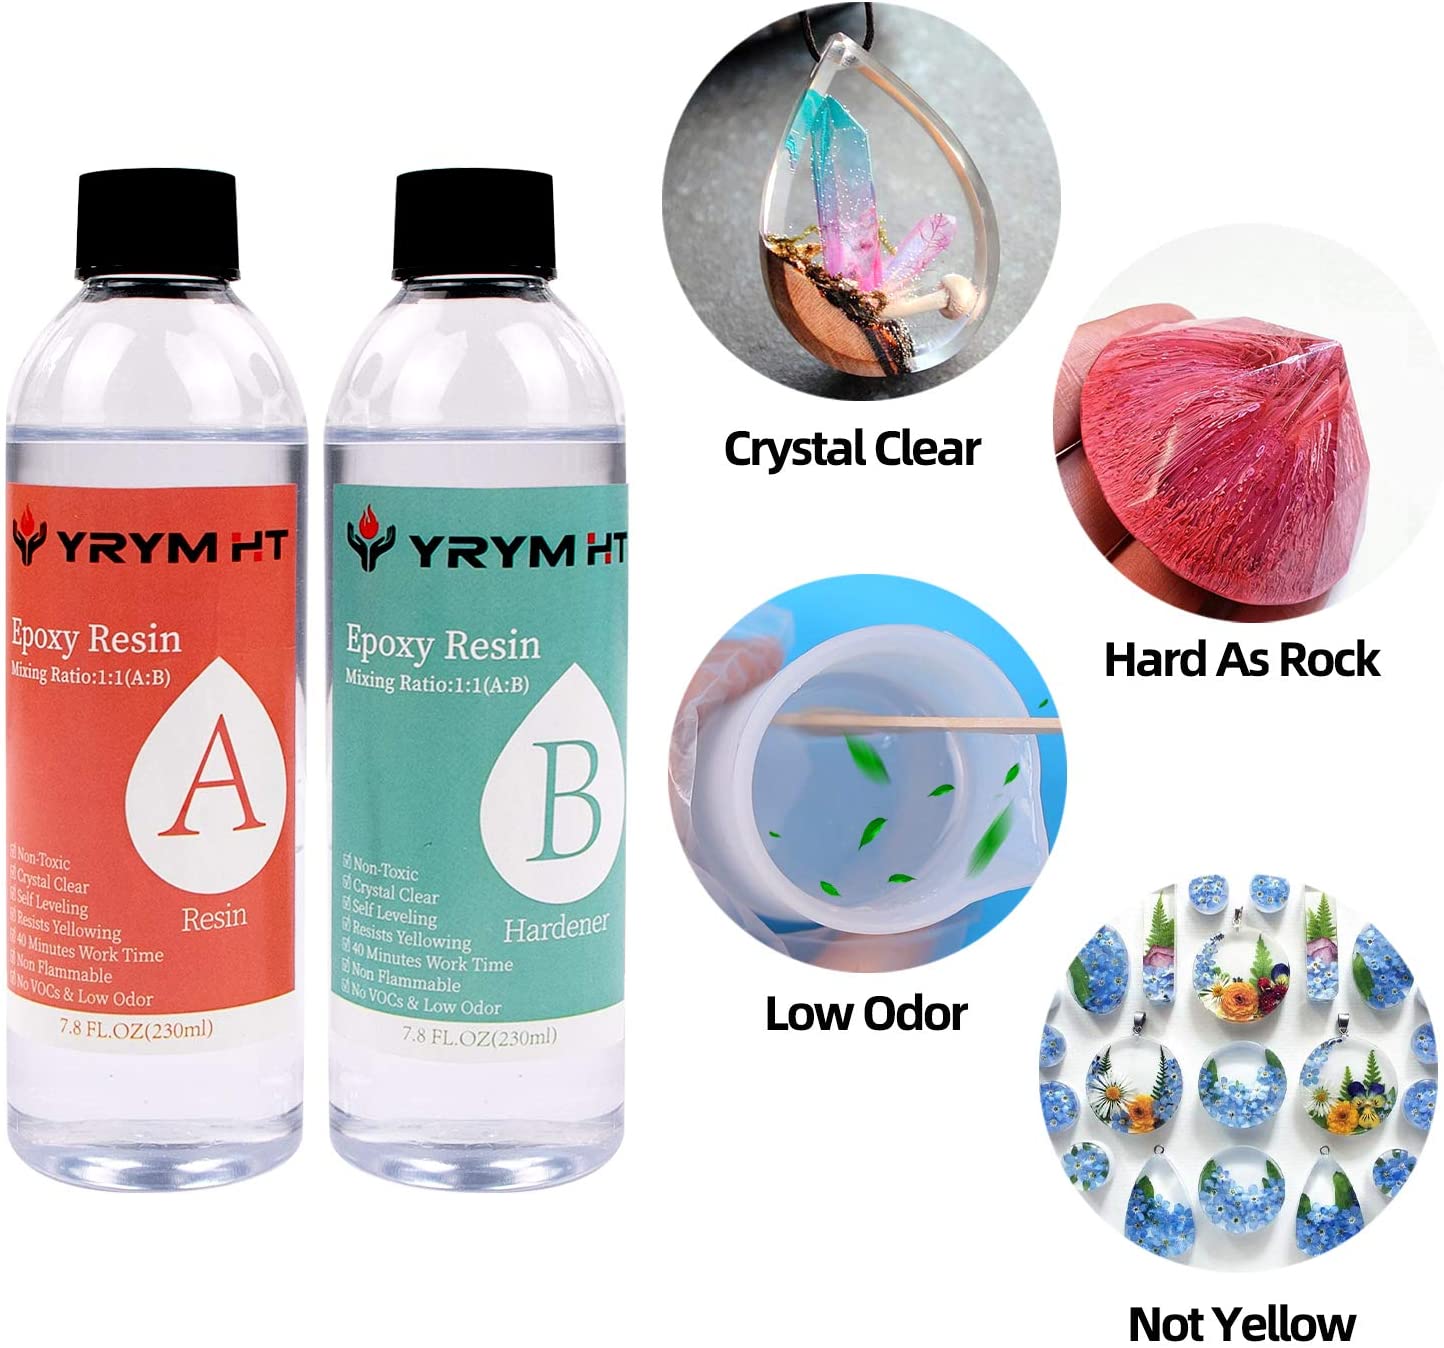 Epoxy Resin Kit for Beginners - 15.5 FL.OZ. Crystal Clear Casting and  Coating Epoxy Resin for Jewelry Making, Art, Crafts, Tumblers, River  Tables, UV Resistant, Easy Mix 1:1 Resin Epoxy Kit